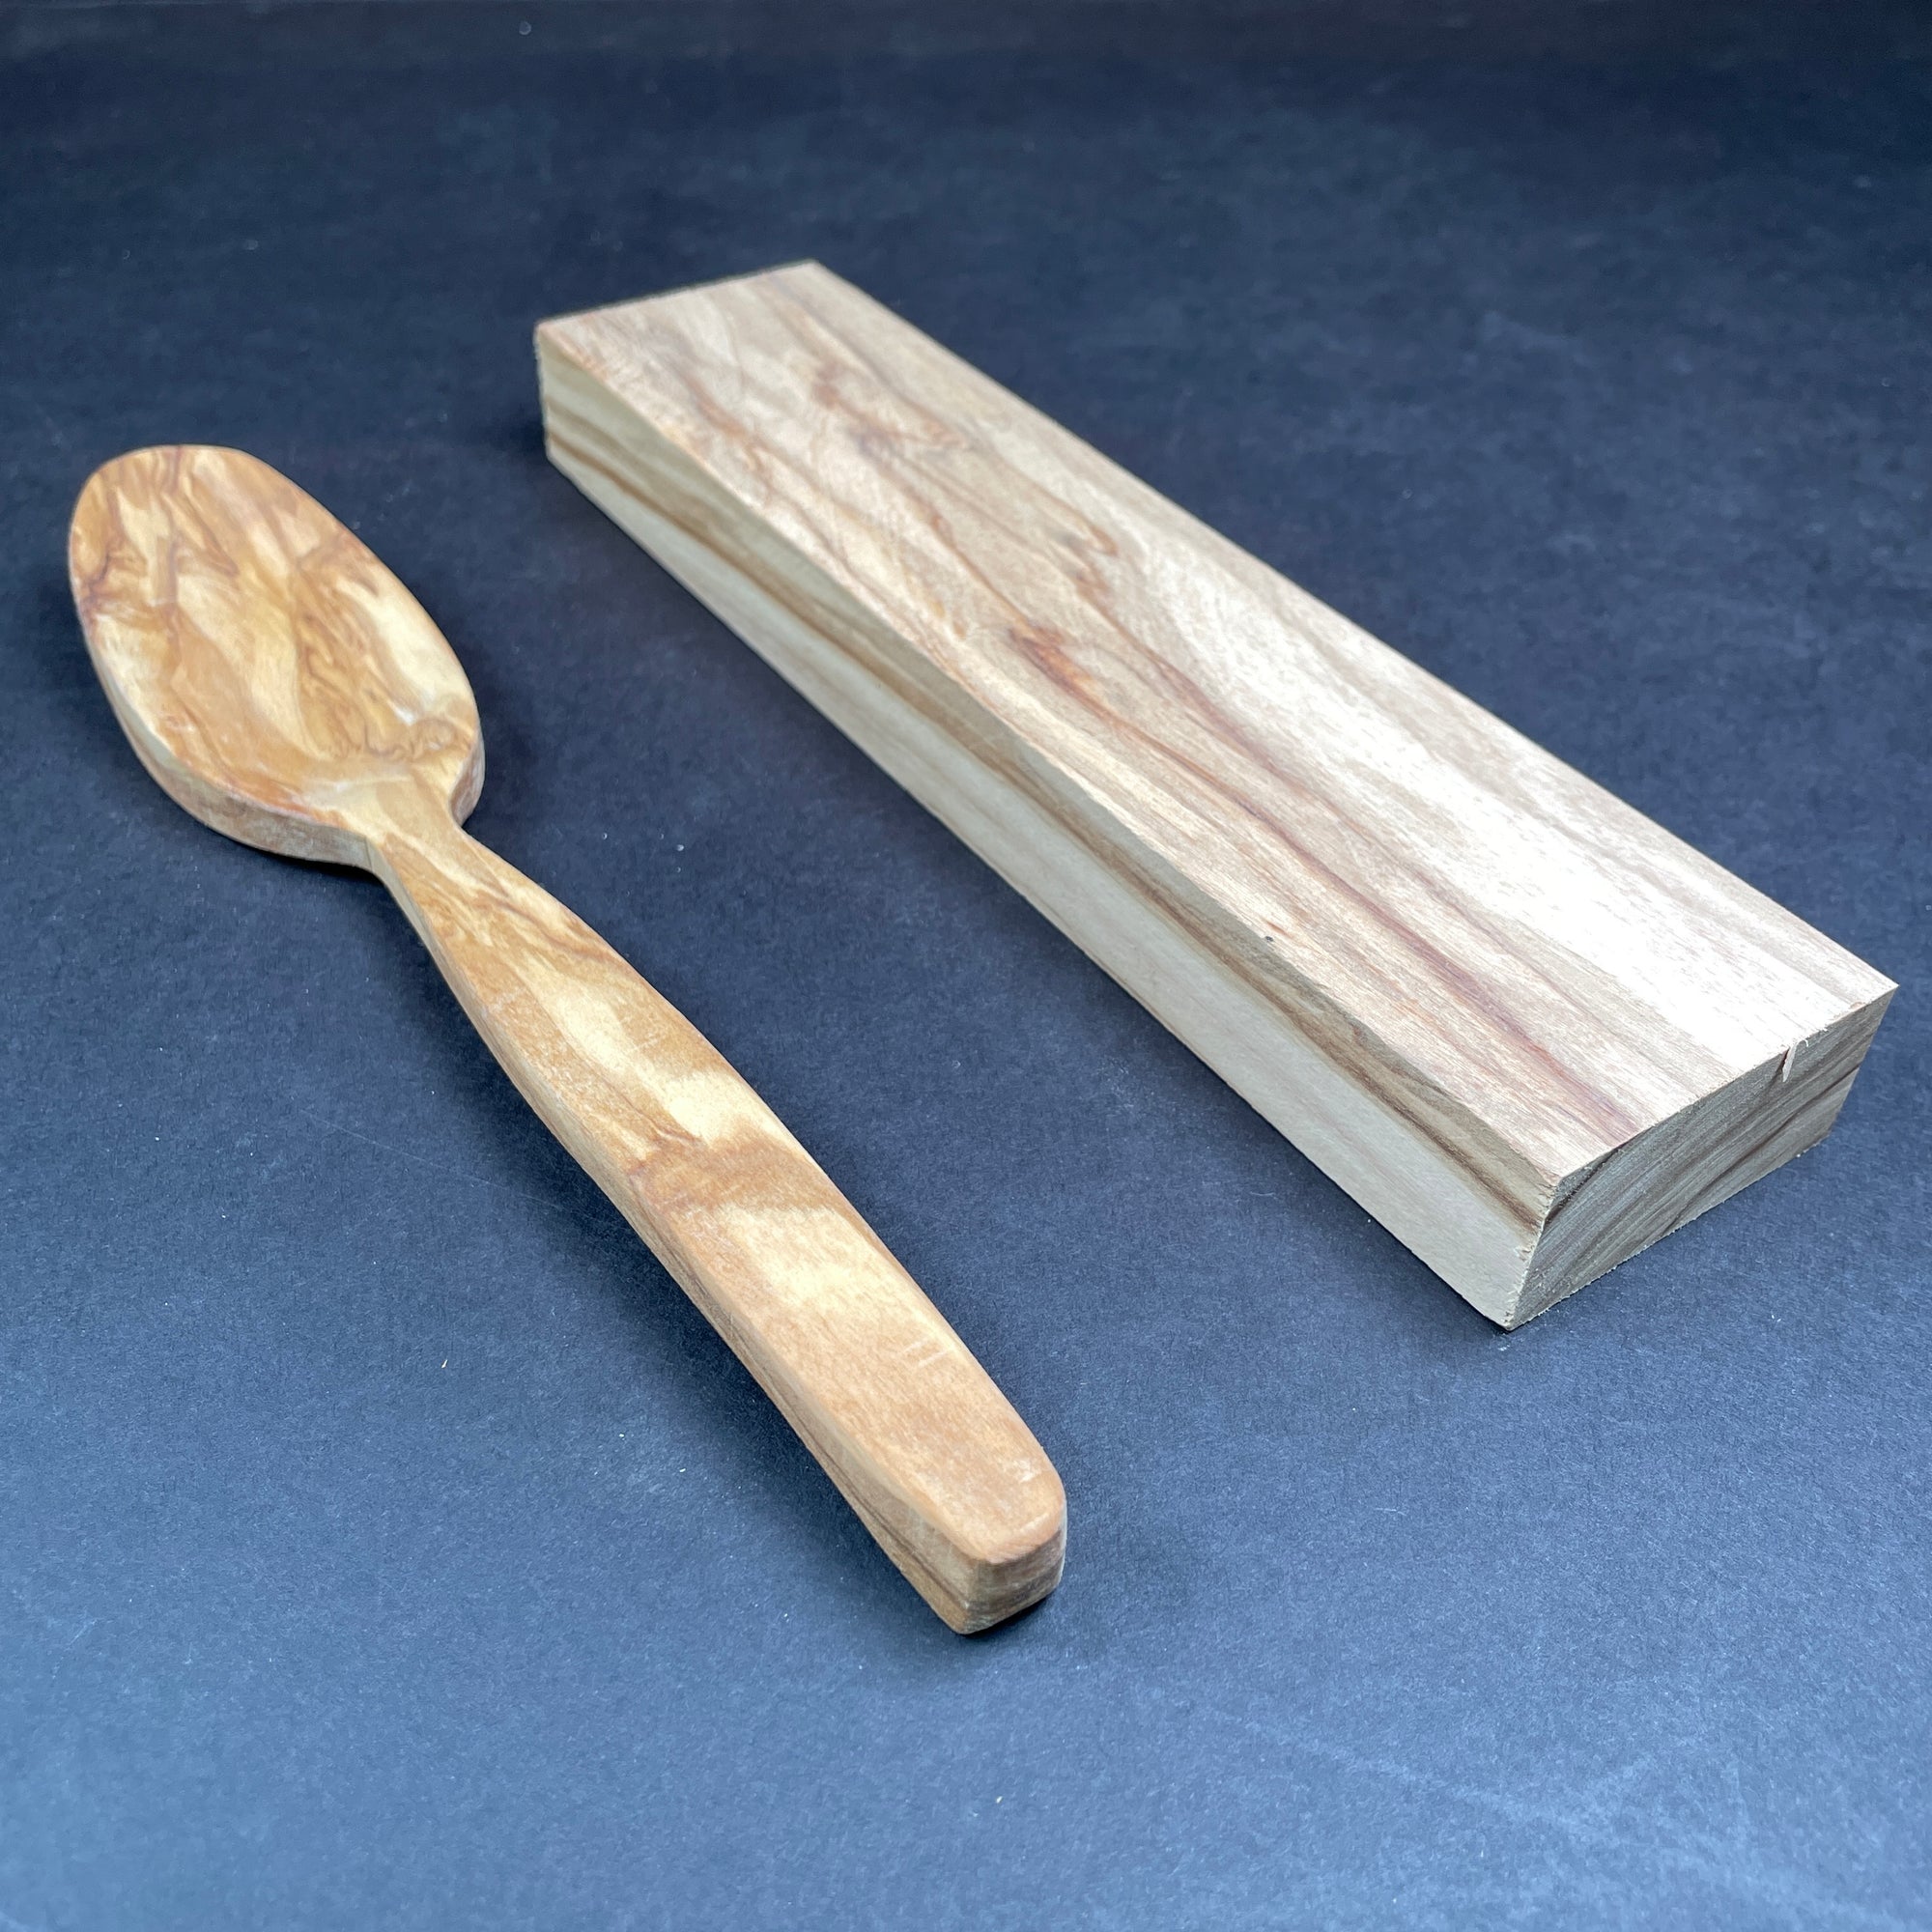 High-Quality Wood Carving Blanks for Spoons & Salad Forks - Compatible with Tracing Templates